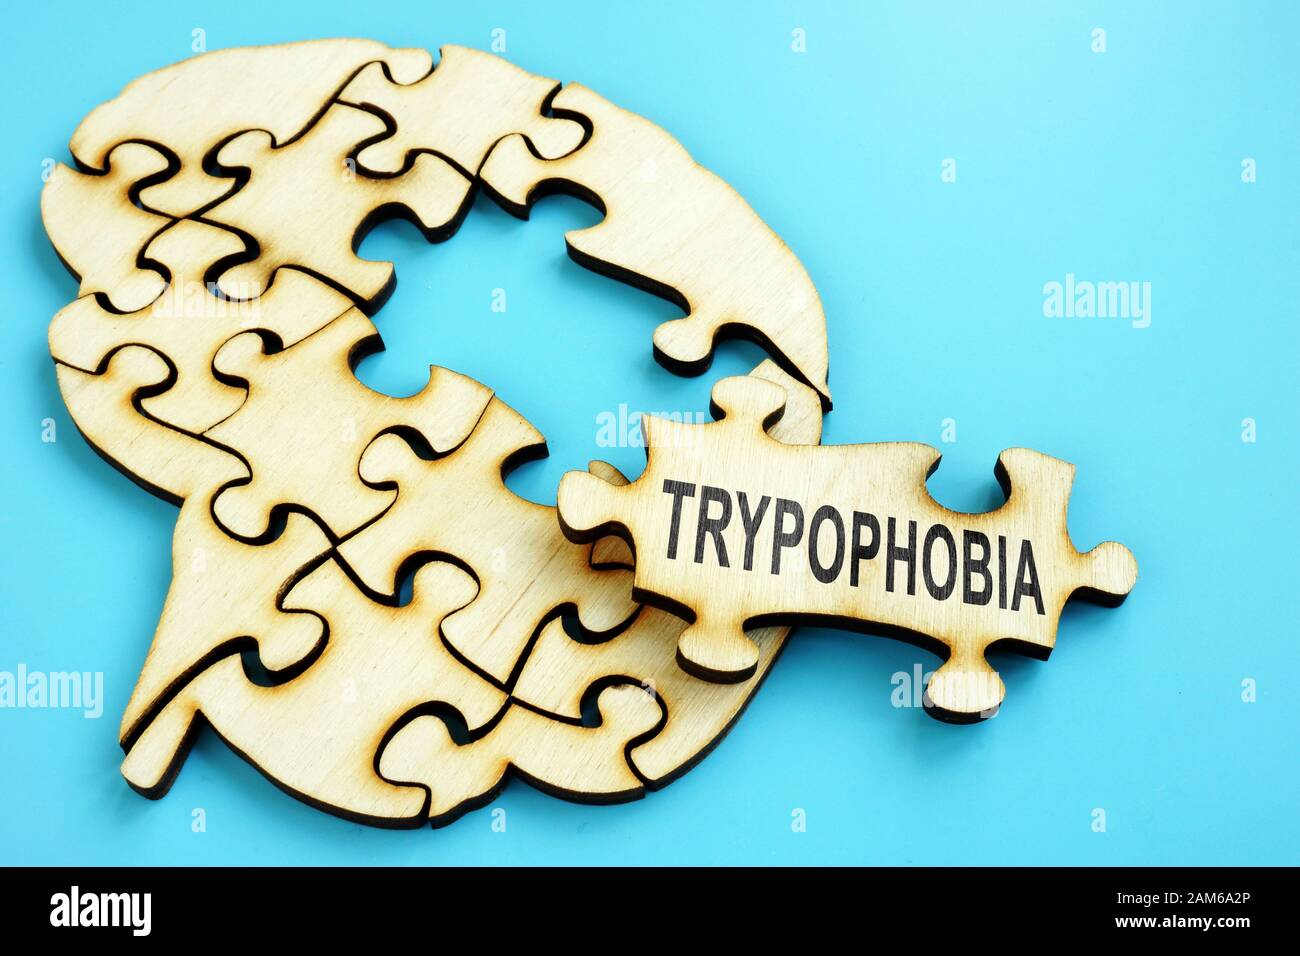 Word Trypophobia on the wooden puzzle with brain shape. Stock Photo